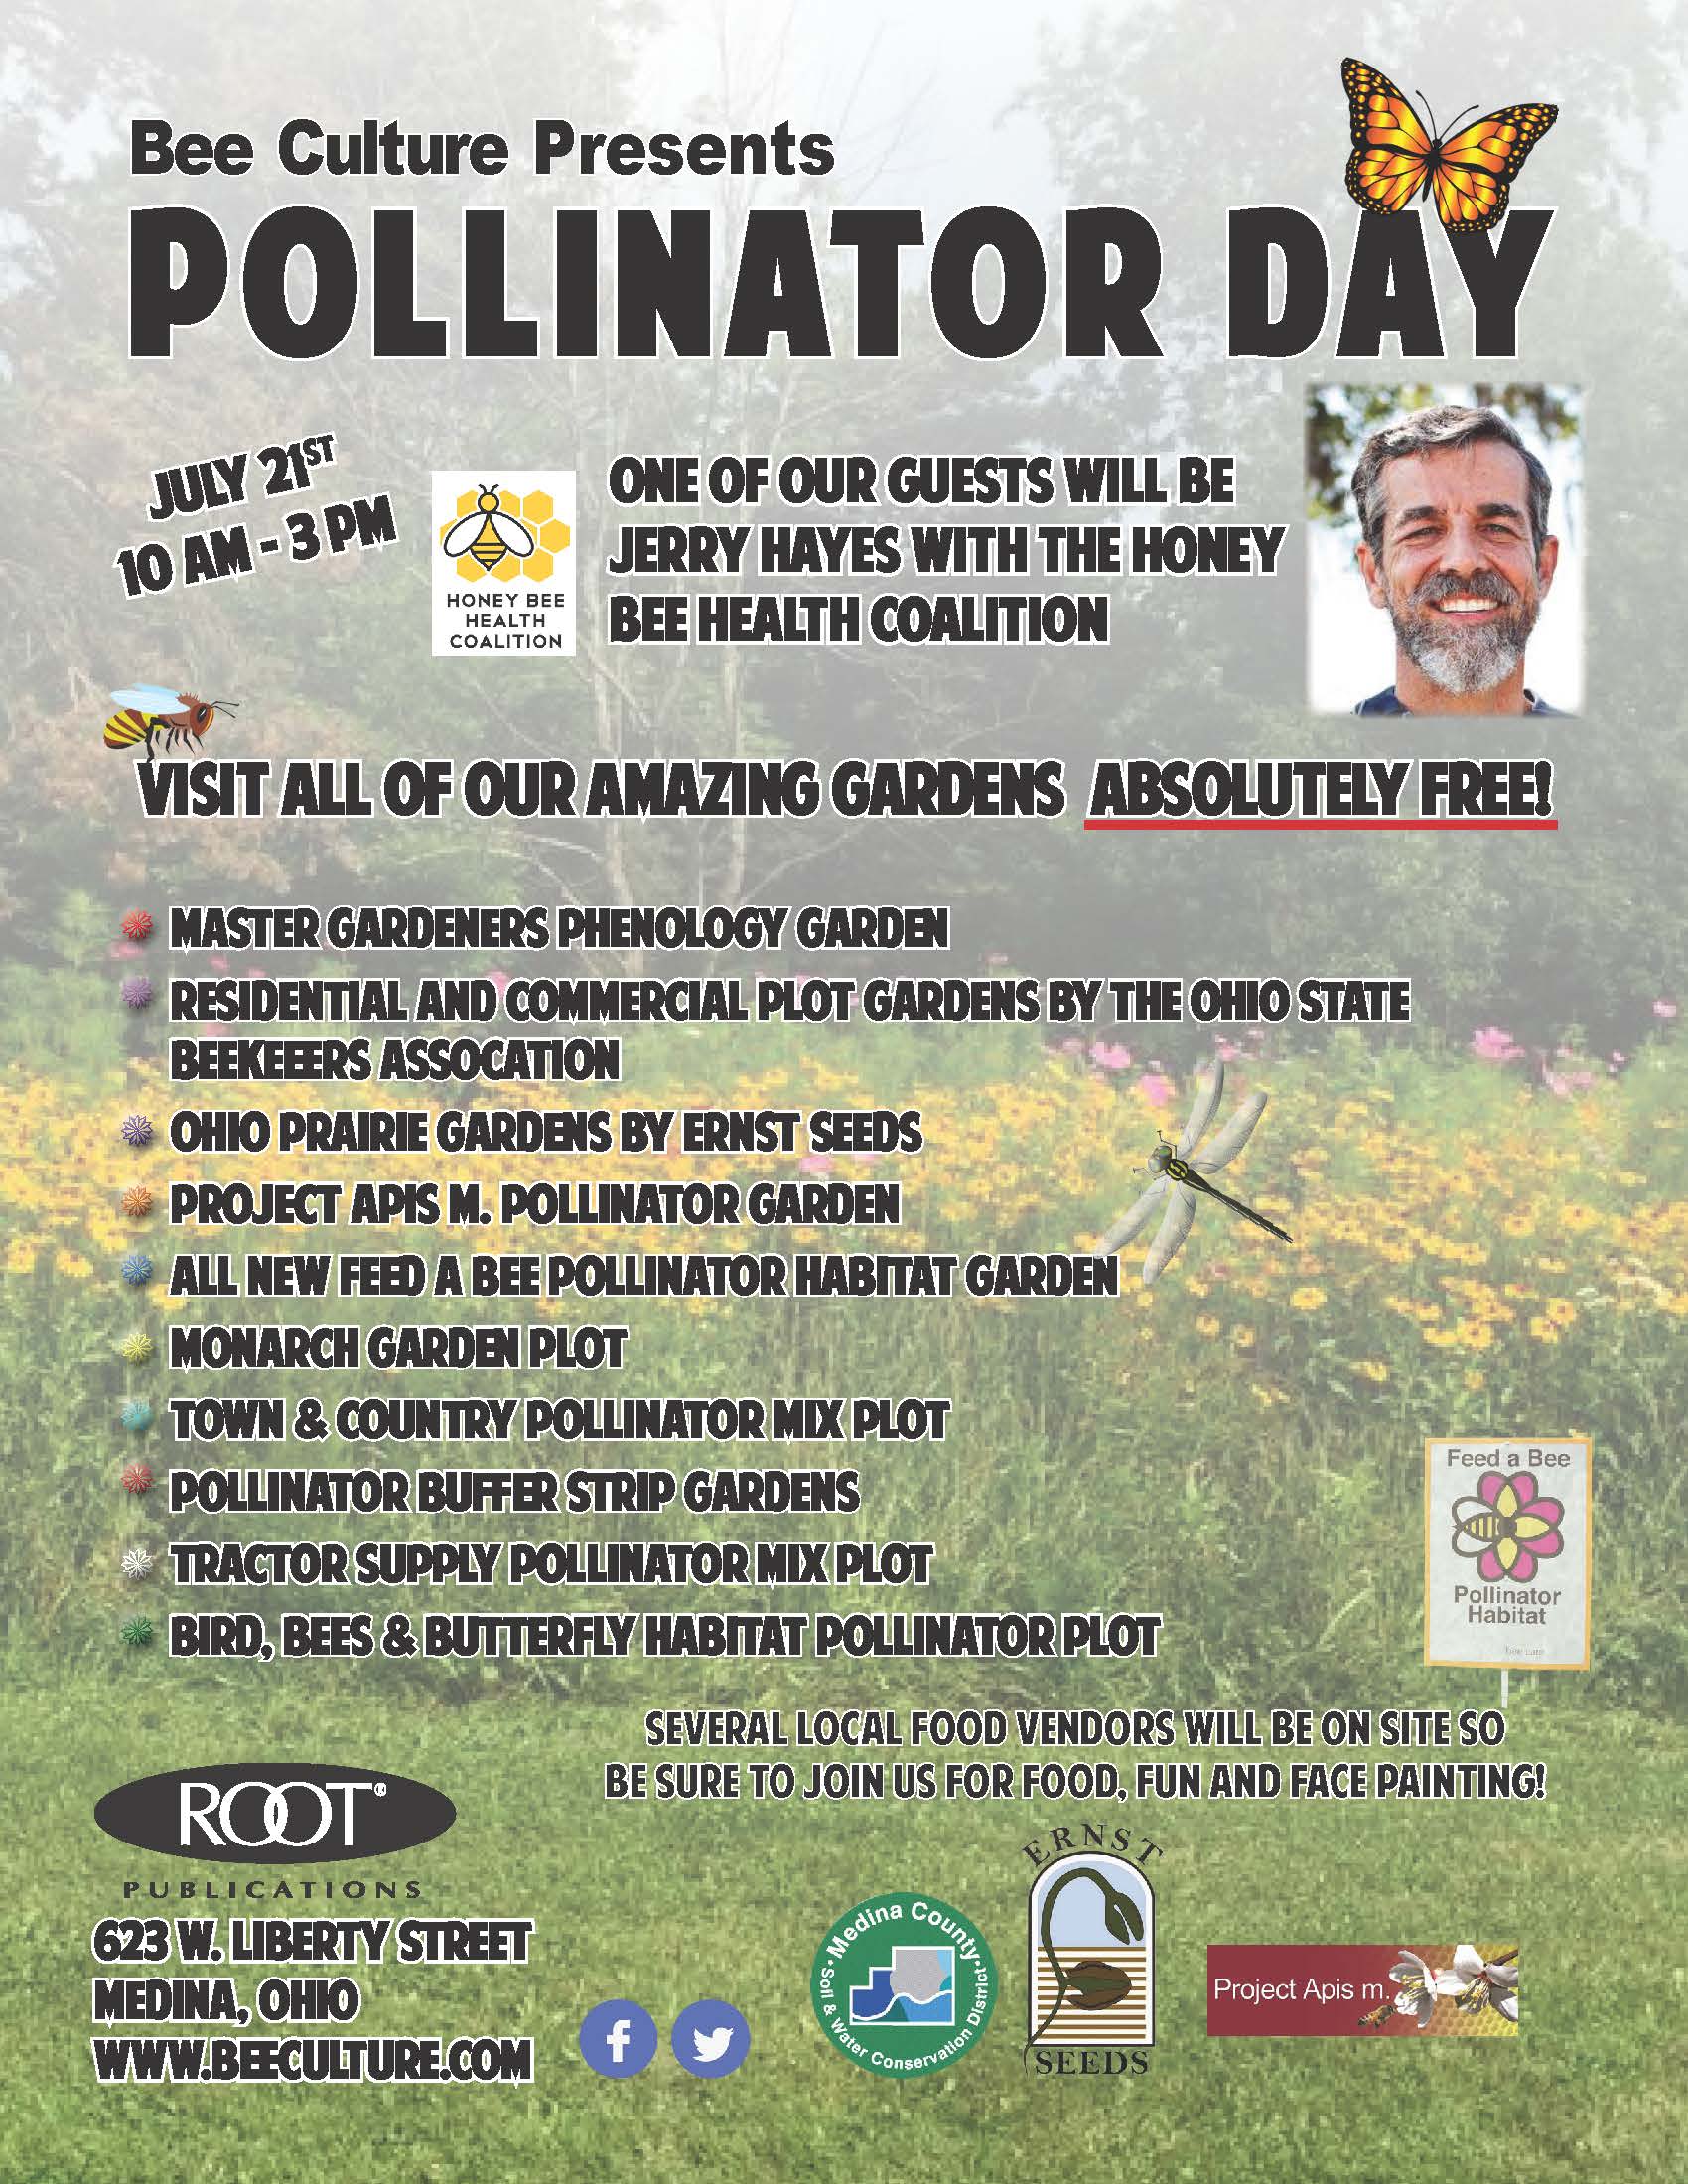 CATCH THE BUZZ – BEE CULTURE’S POLLINATOR DAY 2018